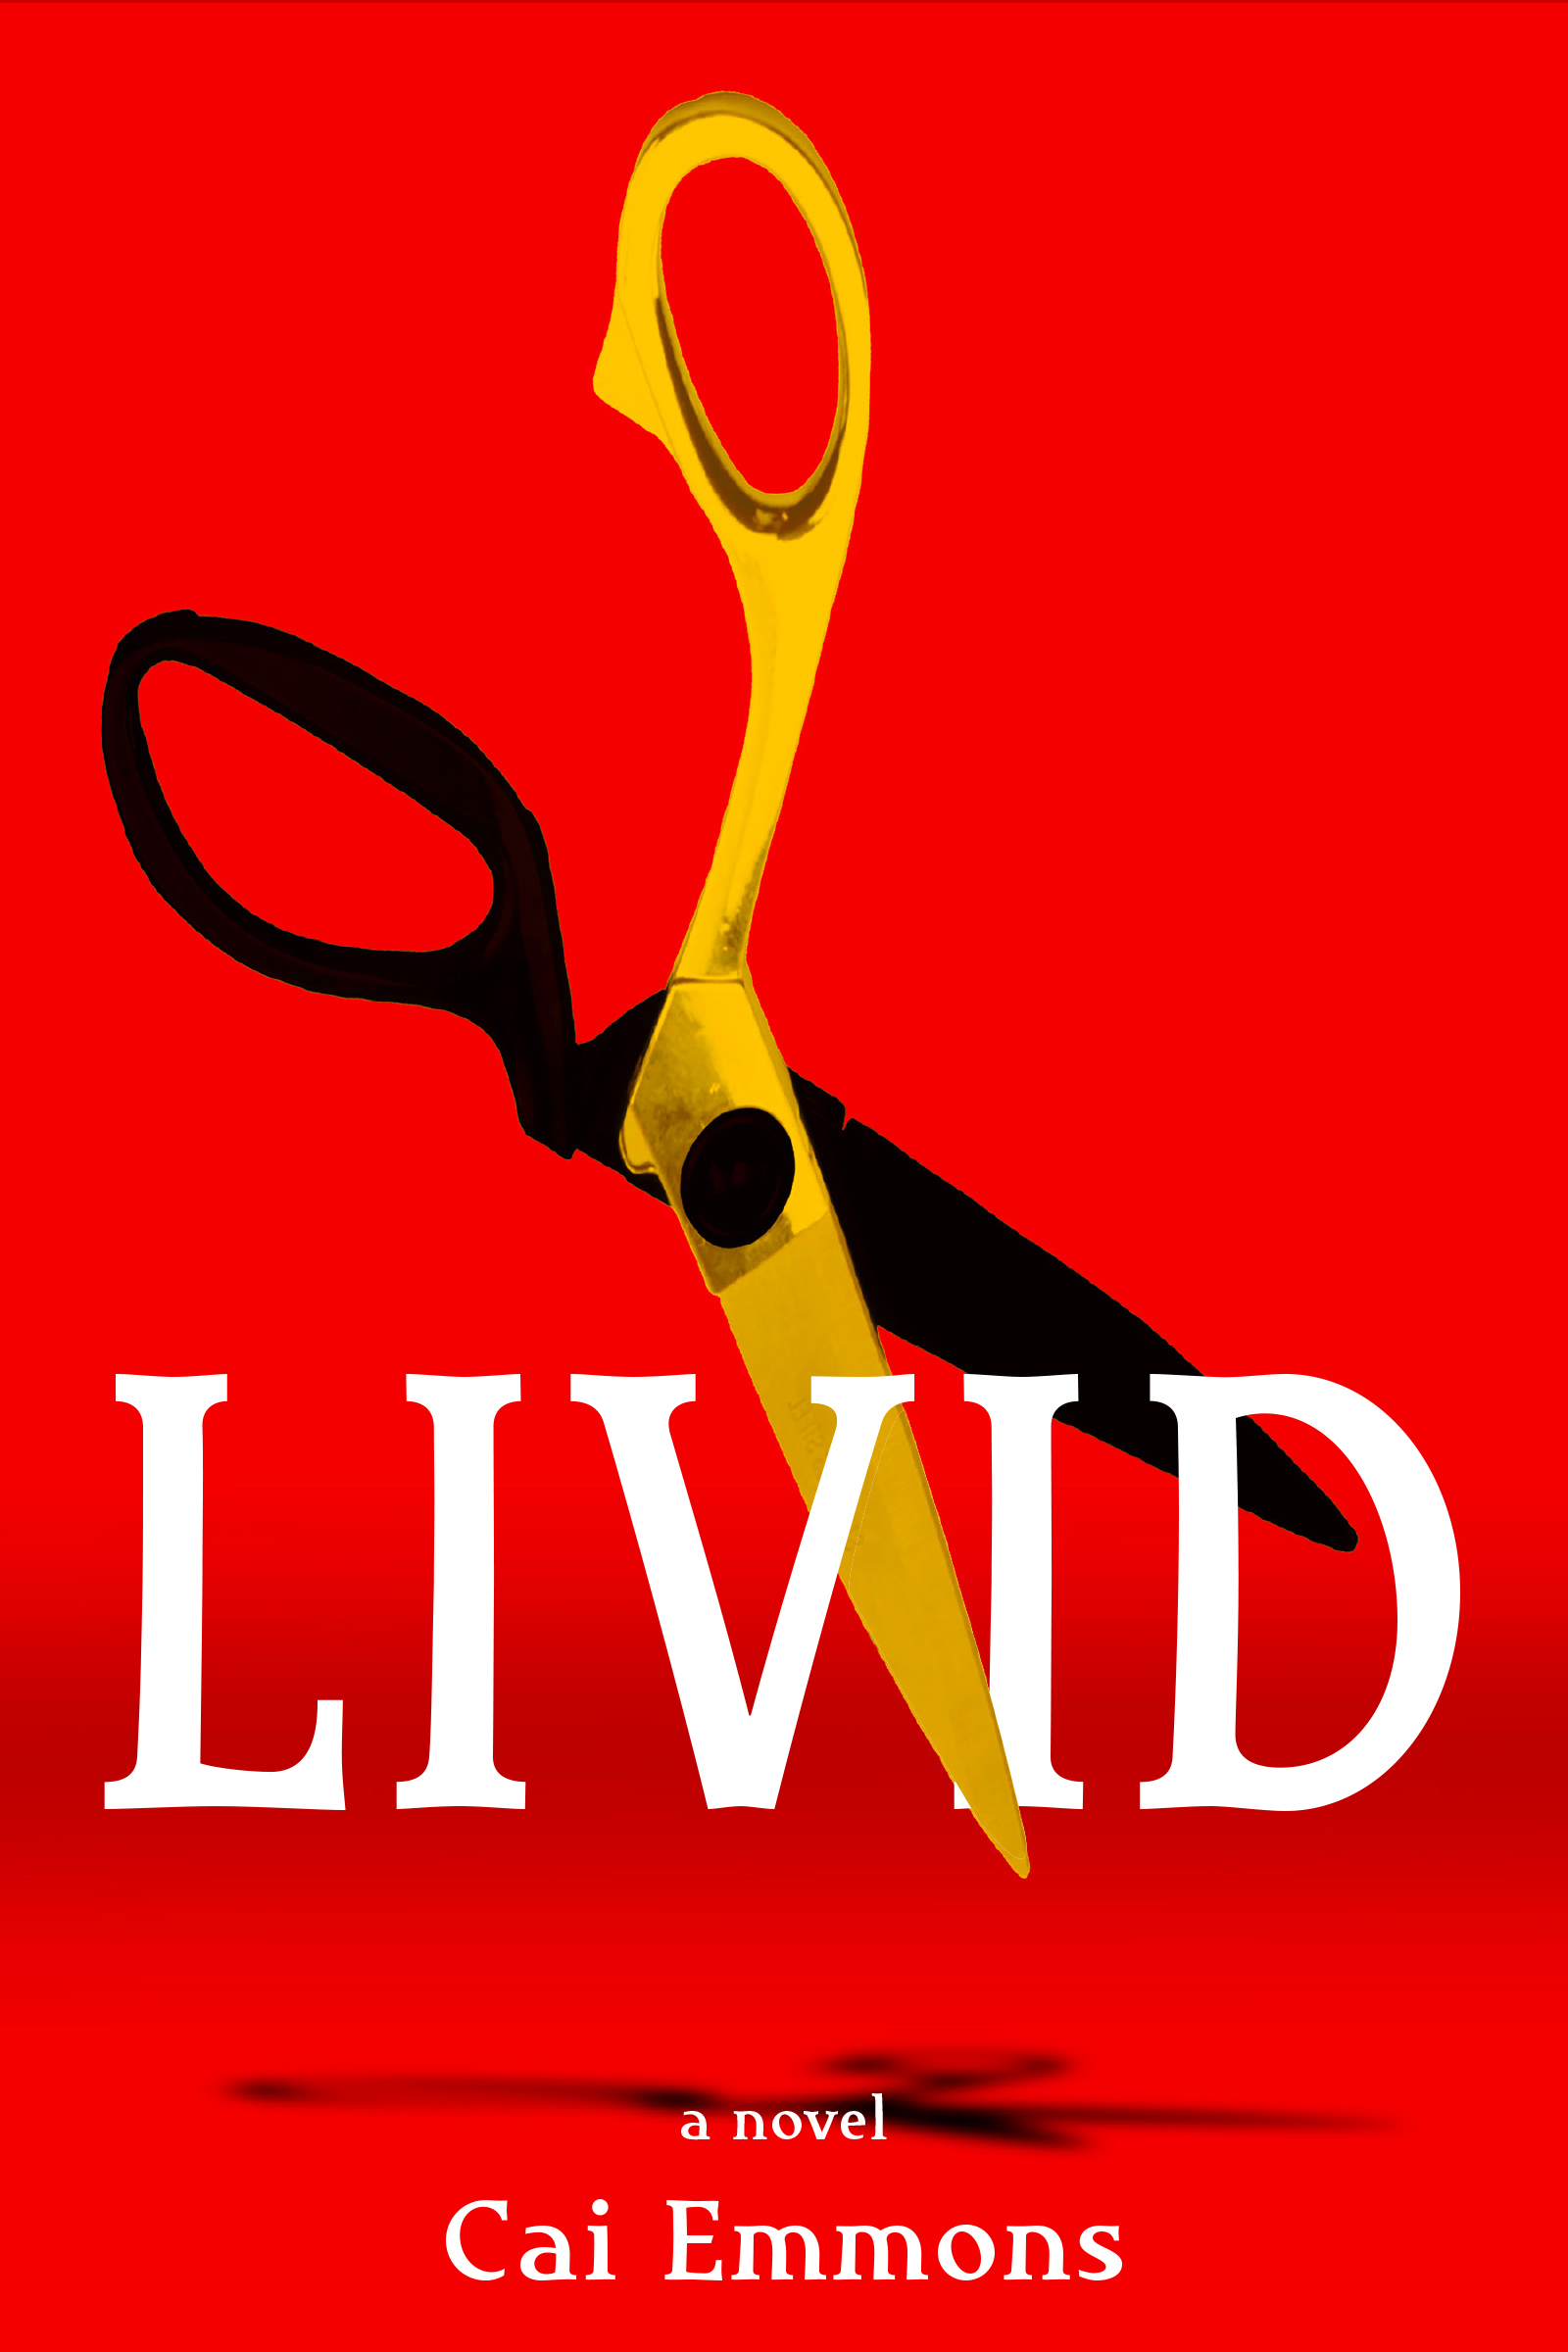 Dark red cover featuring a single pair of scissors with one half black and one half gold, with white text stating "Livid, a novel by Cai Emmons"